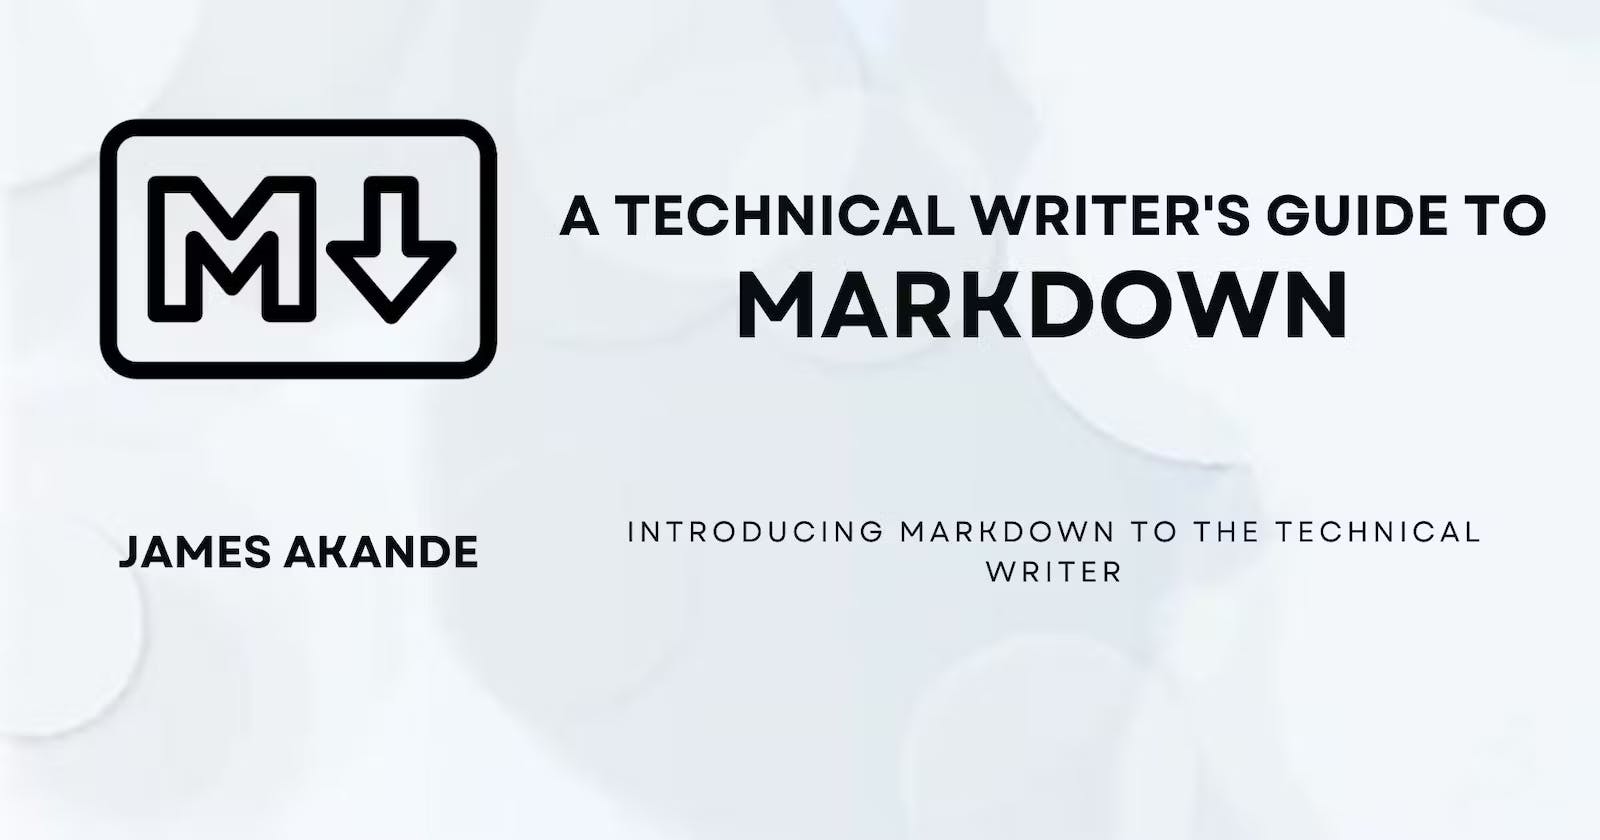 A Technical Writer's Guide To Markdown